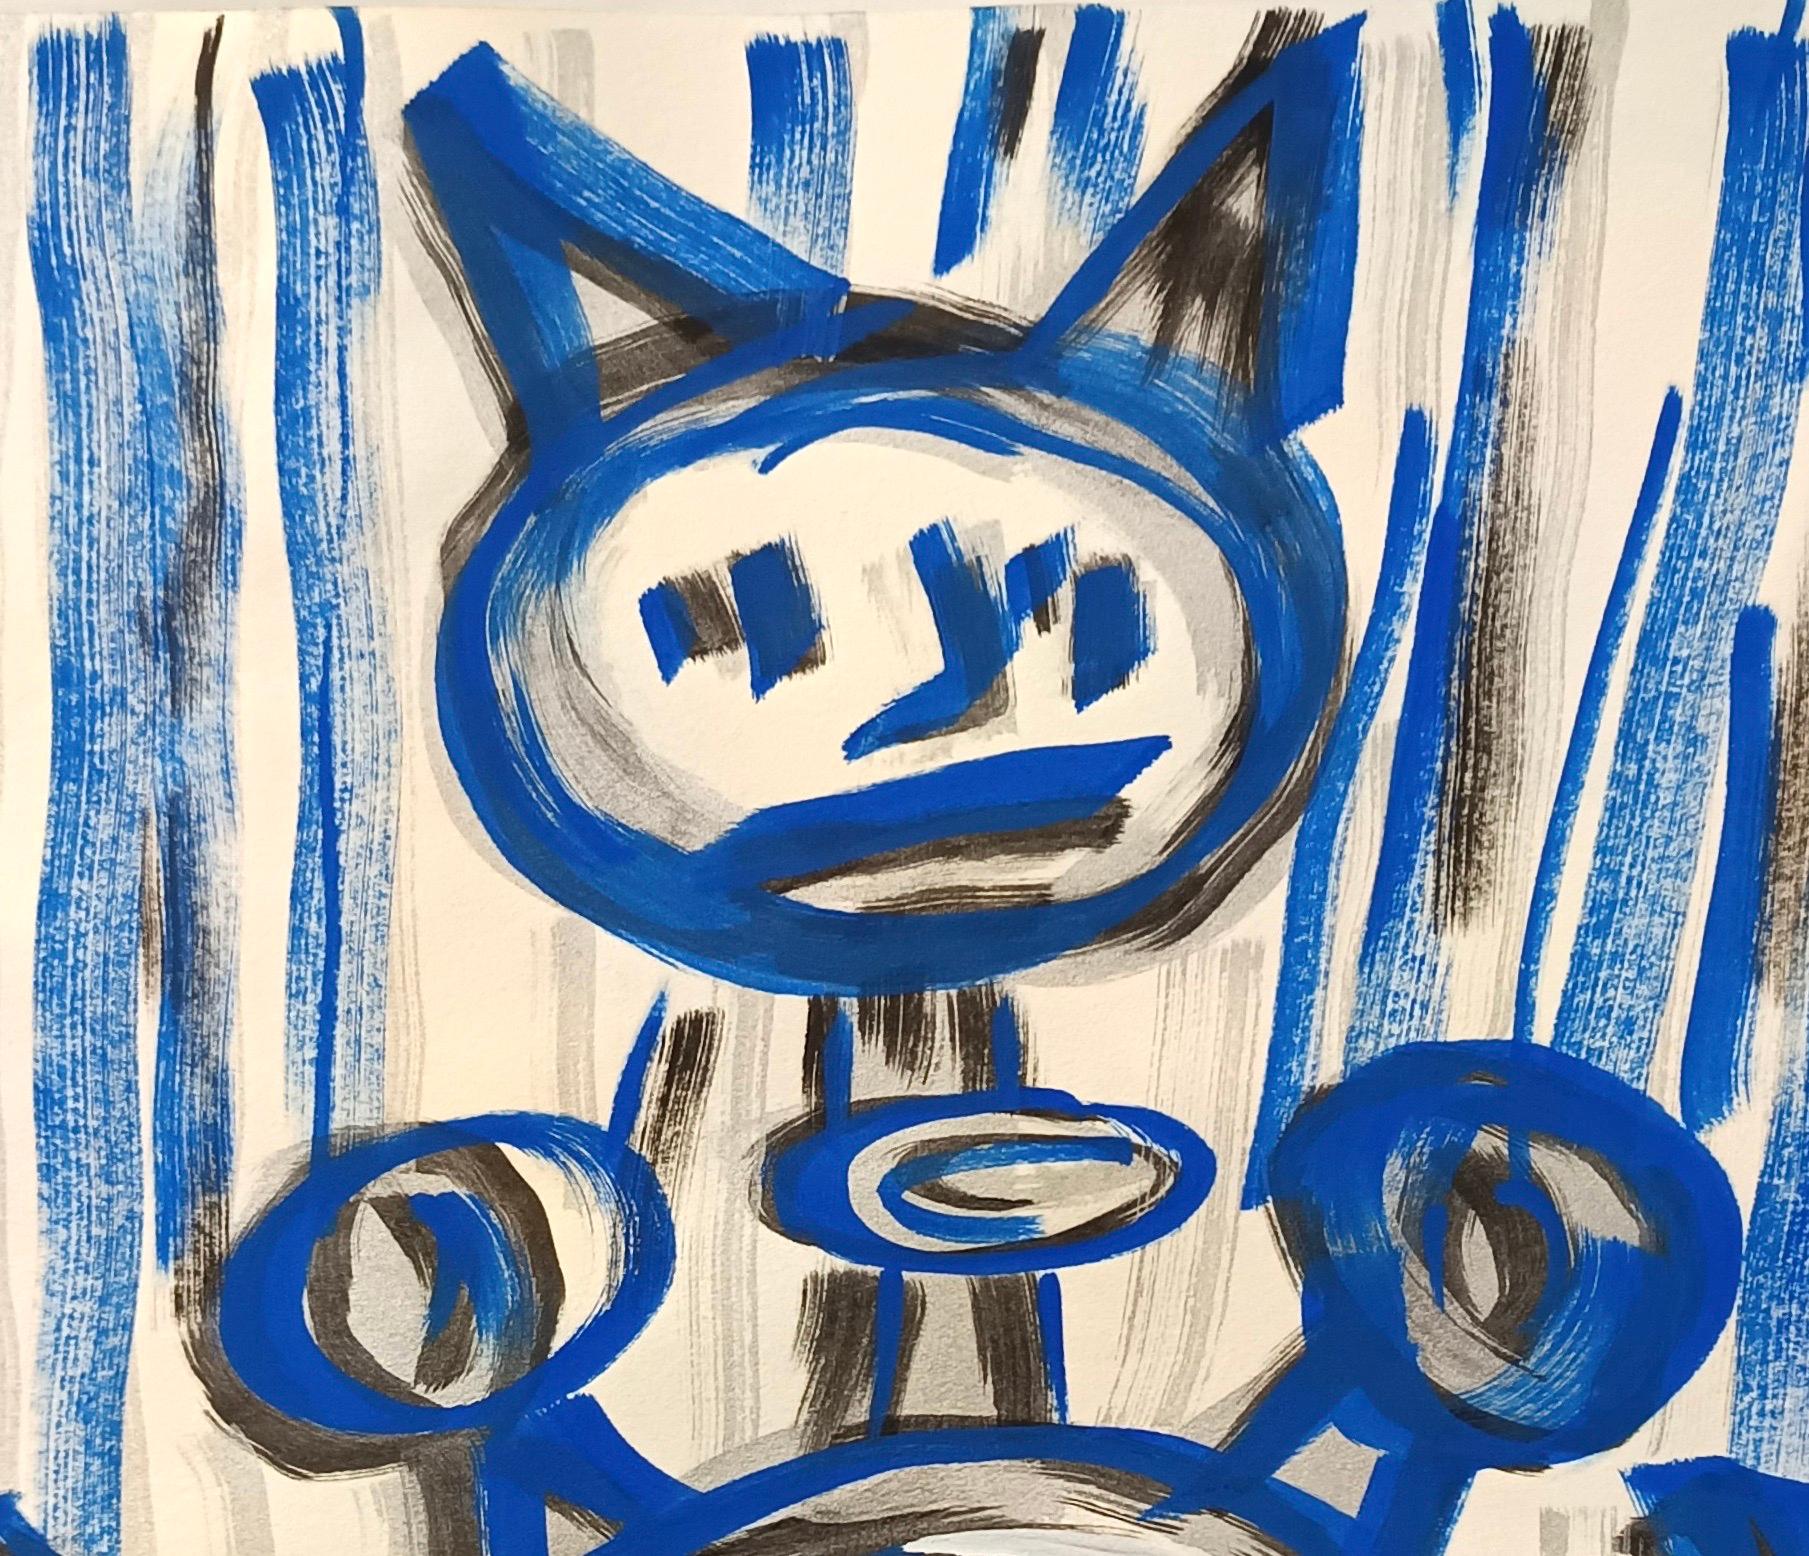 Untitled by E. Wenk, 2020 - 2021 - Black and Blue Acrylic, NeoExpressionism - Painting by Enzio Wenk